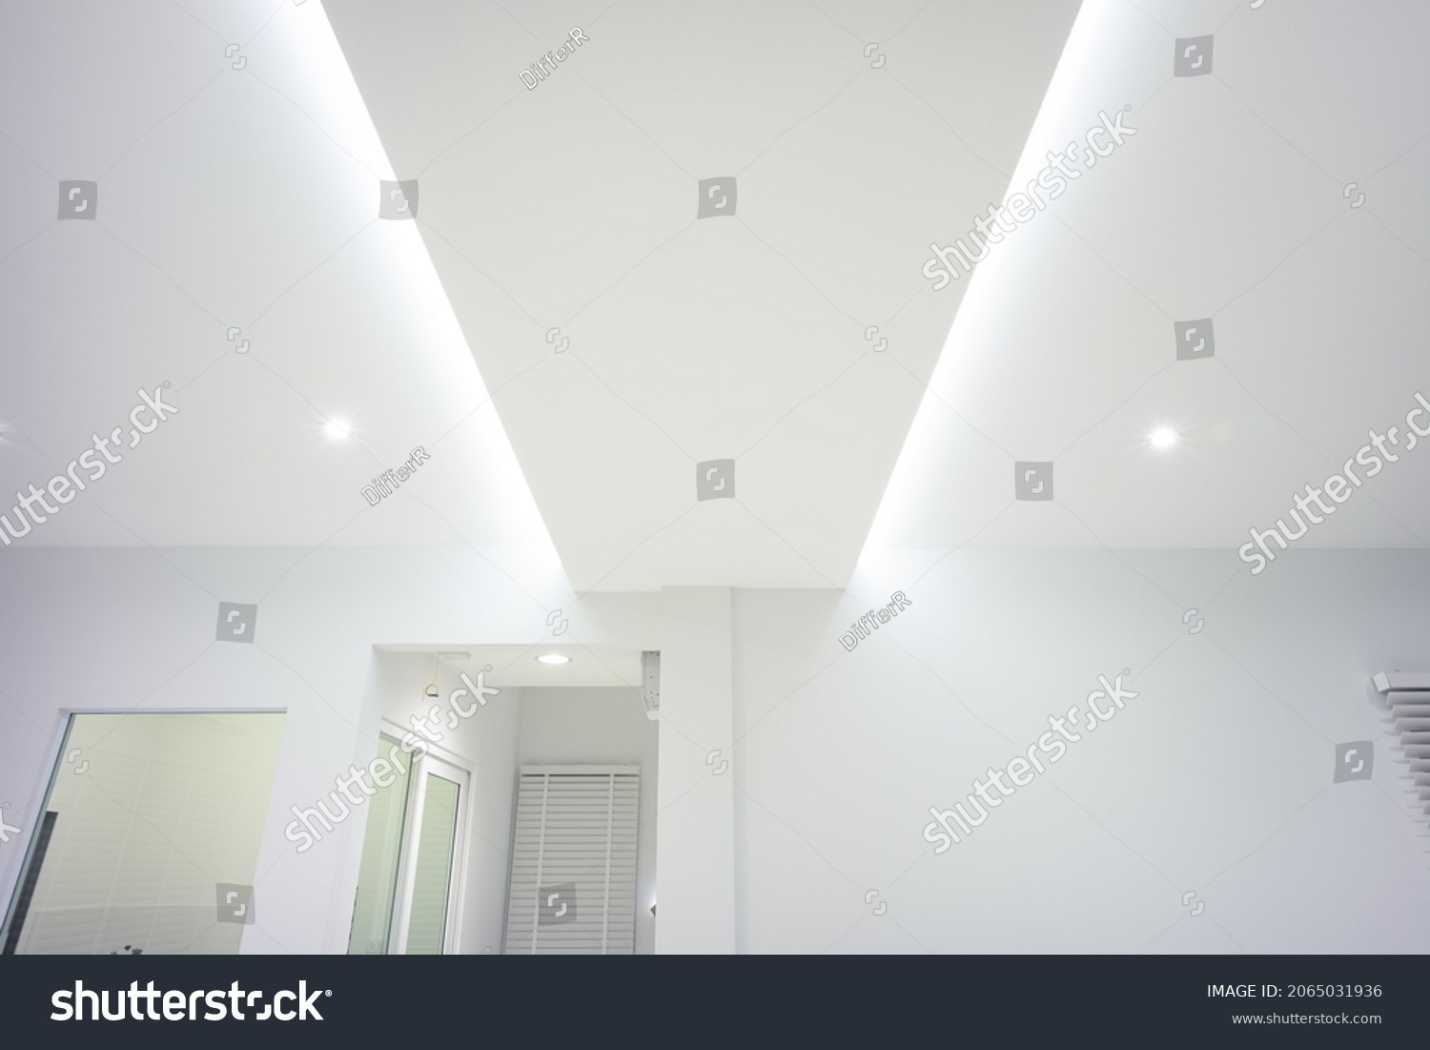 stock-photo-led-strip-light-and-illumination-also-called-ribbon-light-or-led-tape-to-suspended-on-ceiling-in-2065031936.jpg